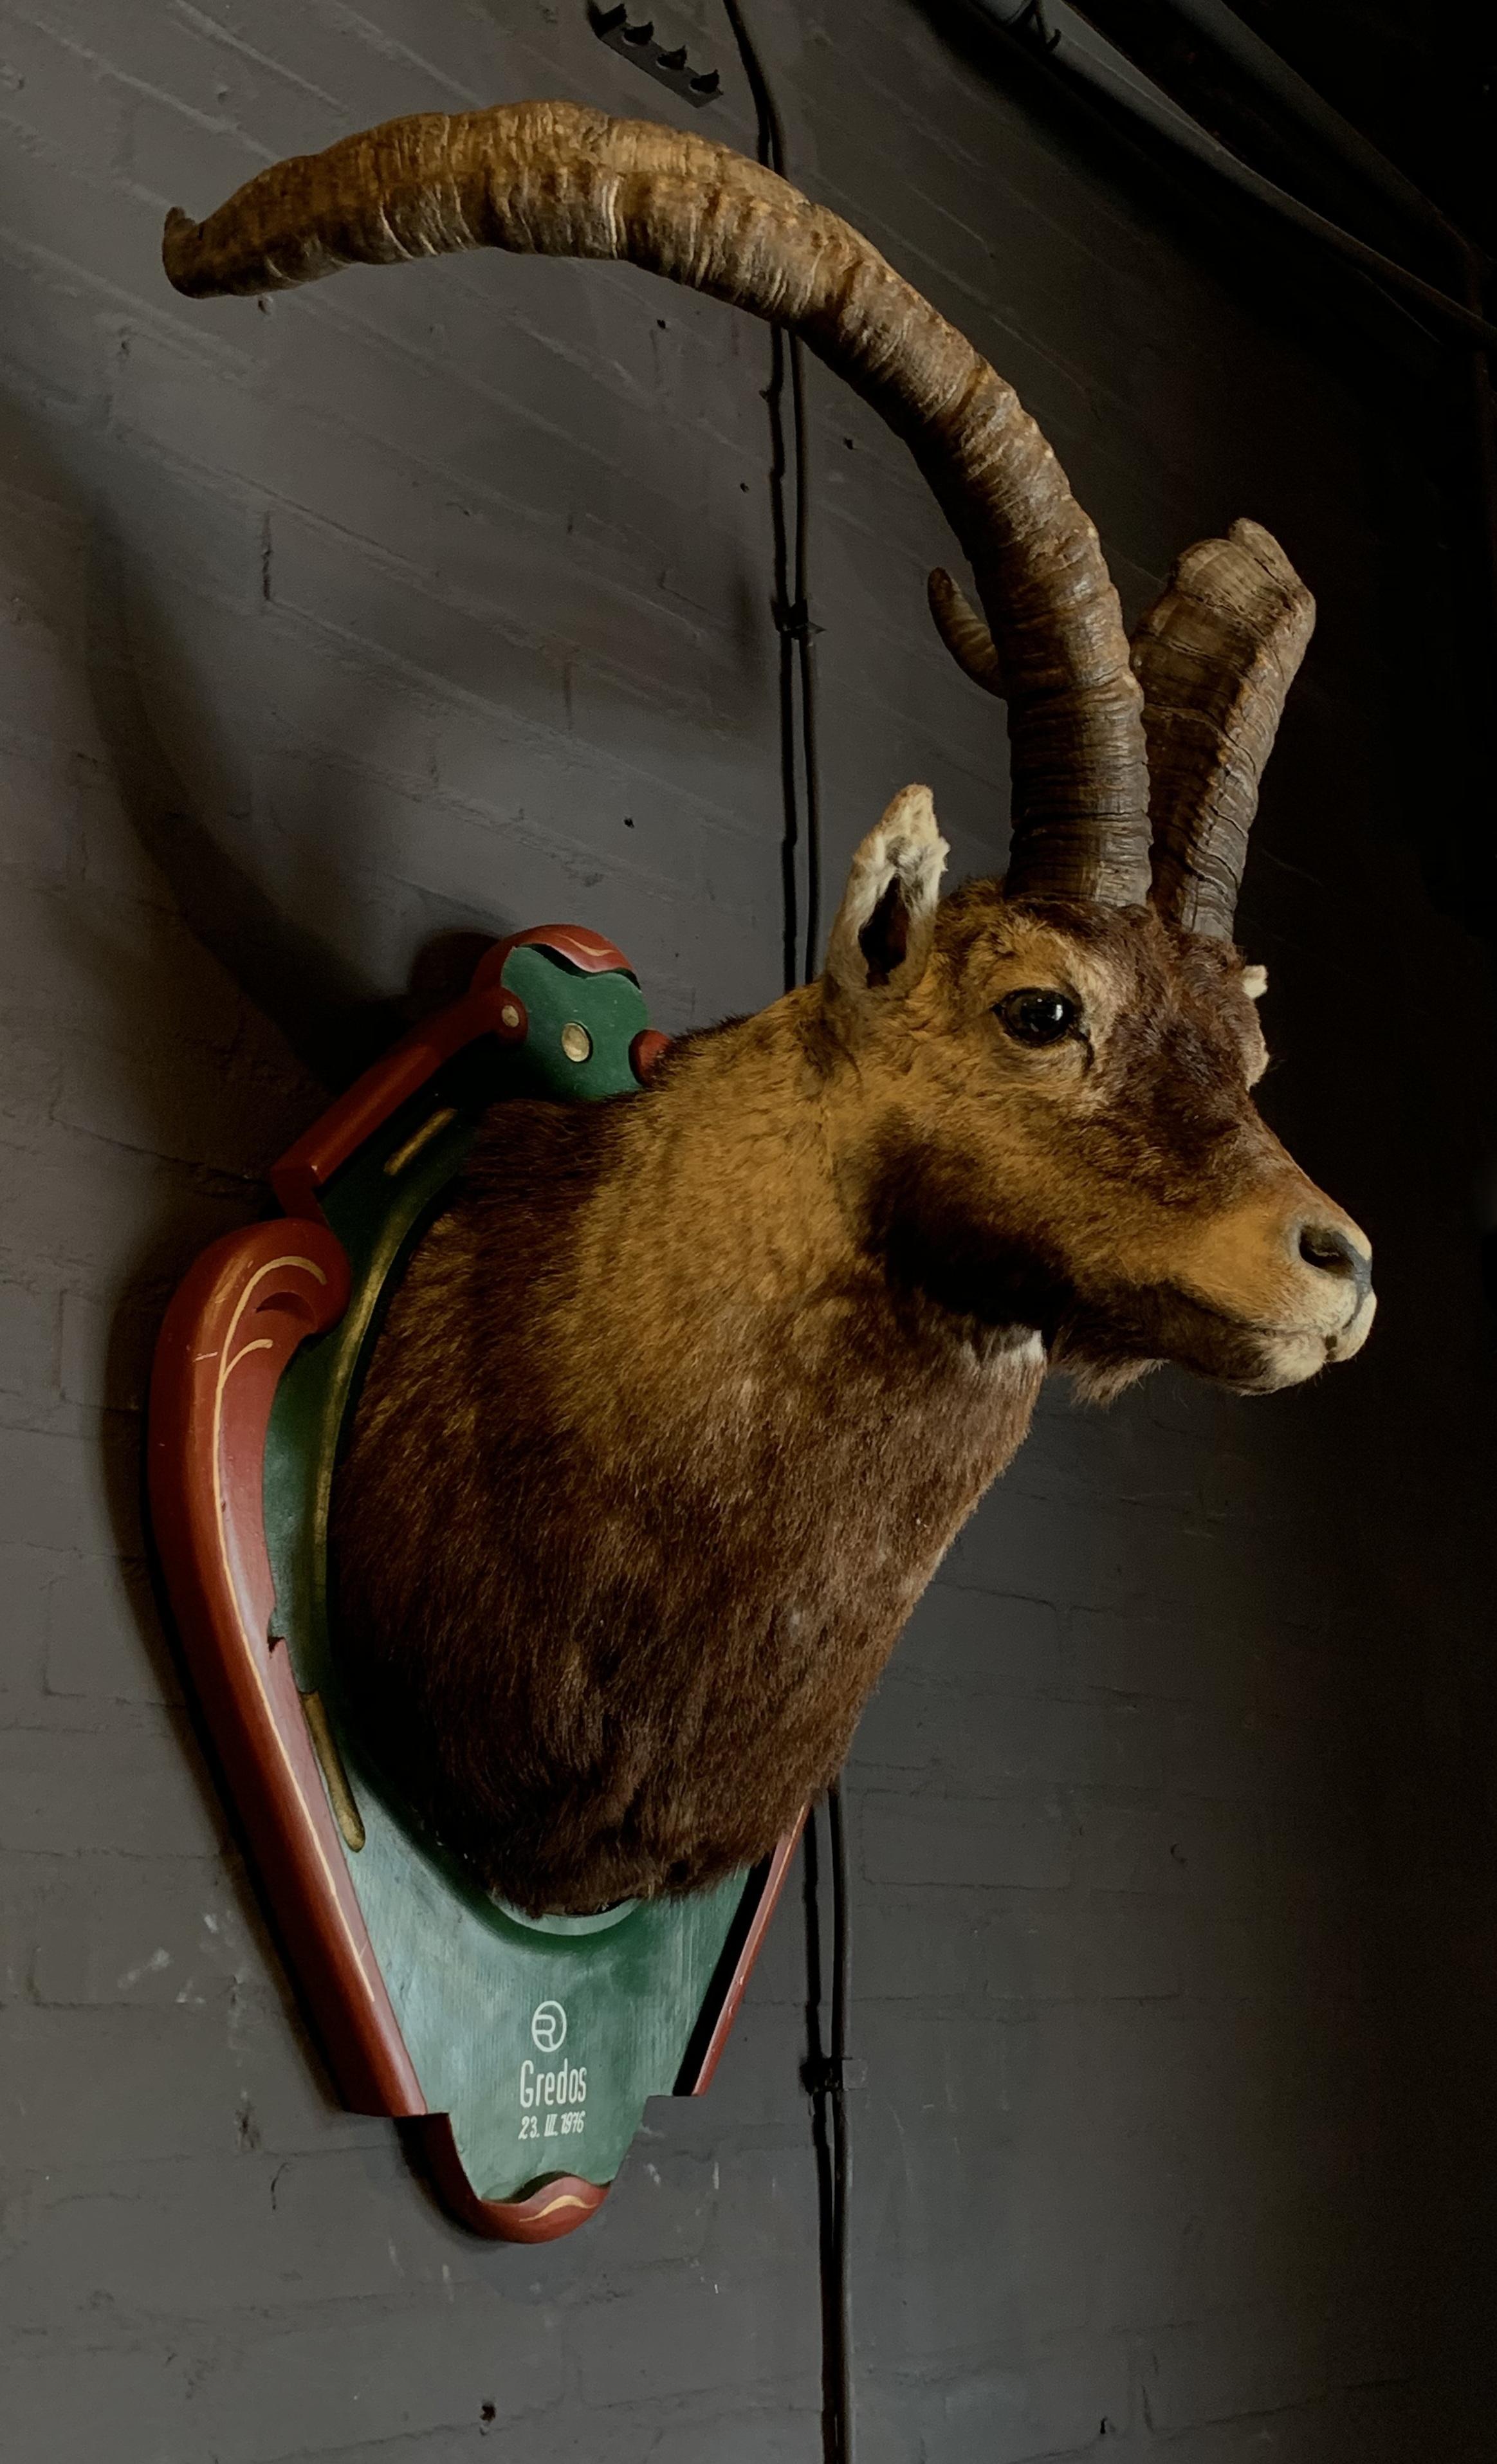 Rare, Vintage trophy head of a Spanish ibex. The taxidermy Ibex is mounted on a handmade wooden plaque.
A real eyecatcher for your Alpine Chalet.